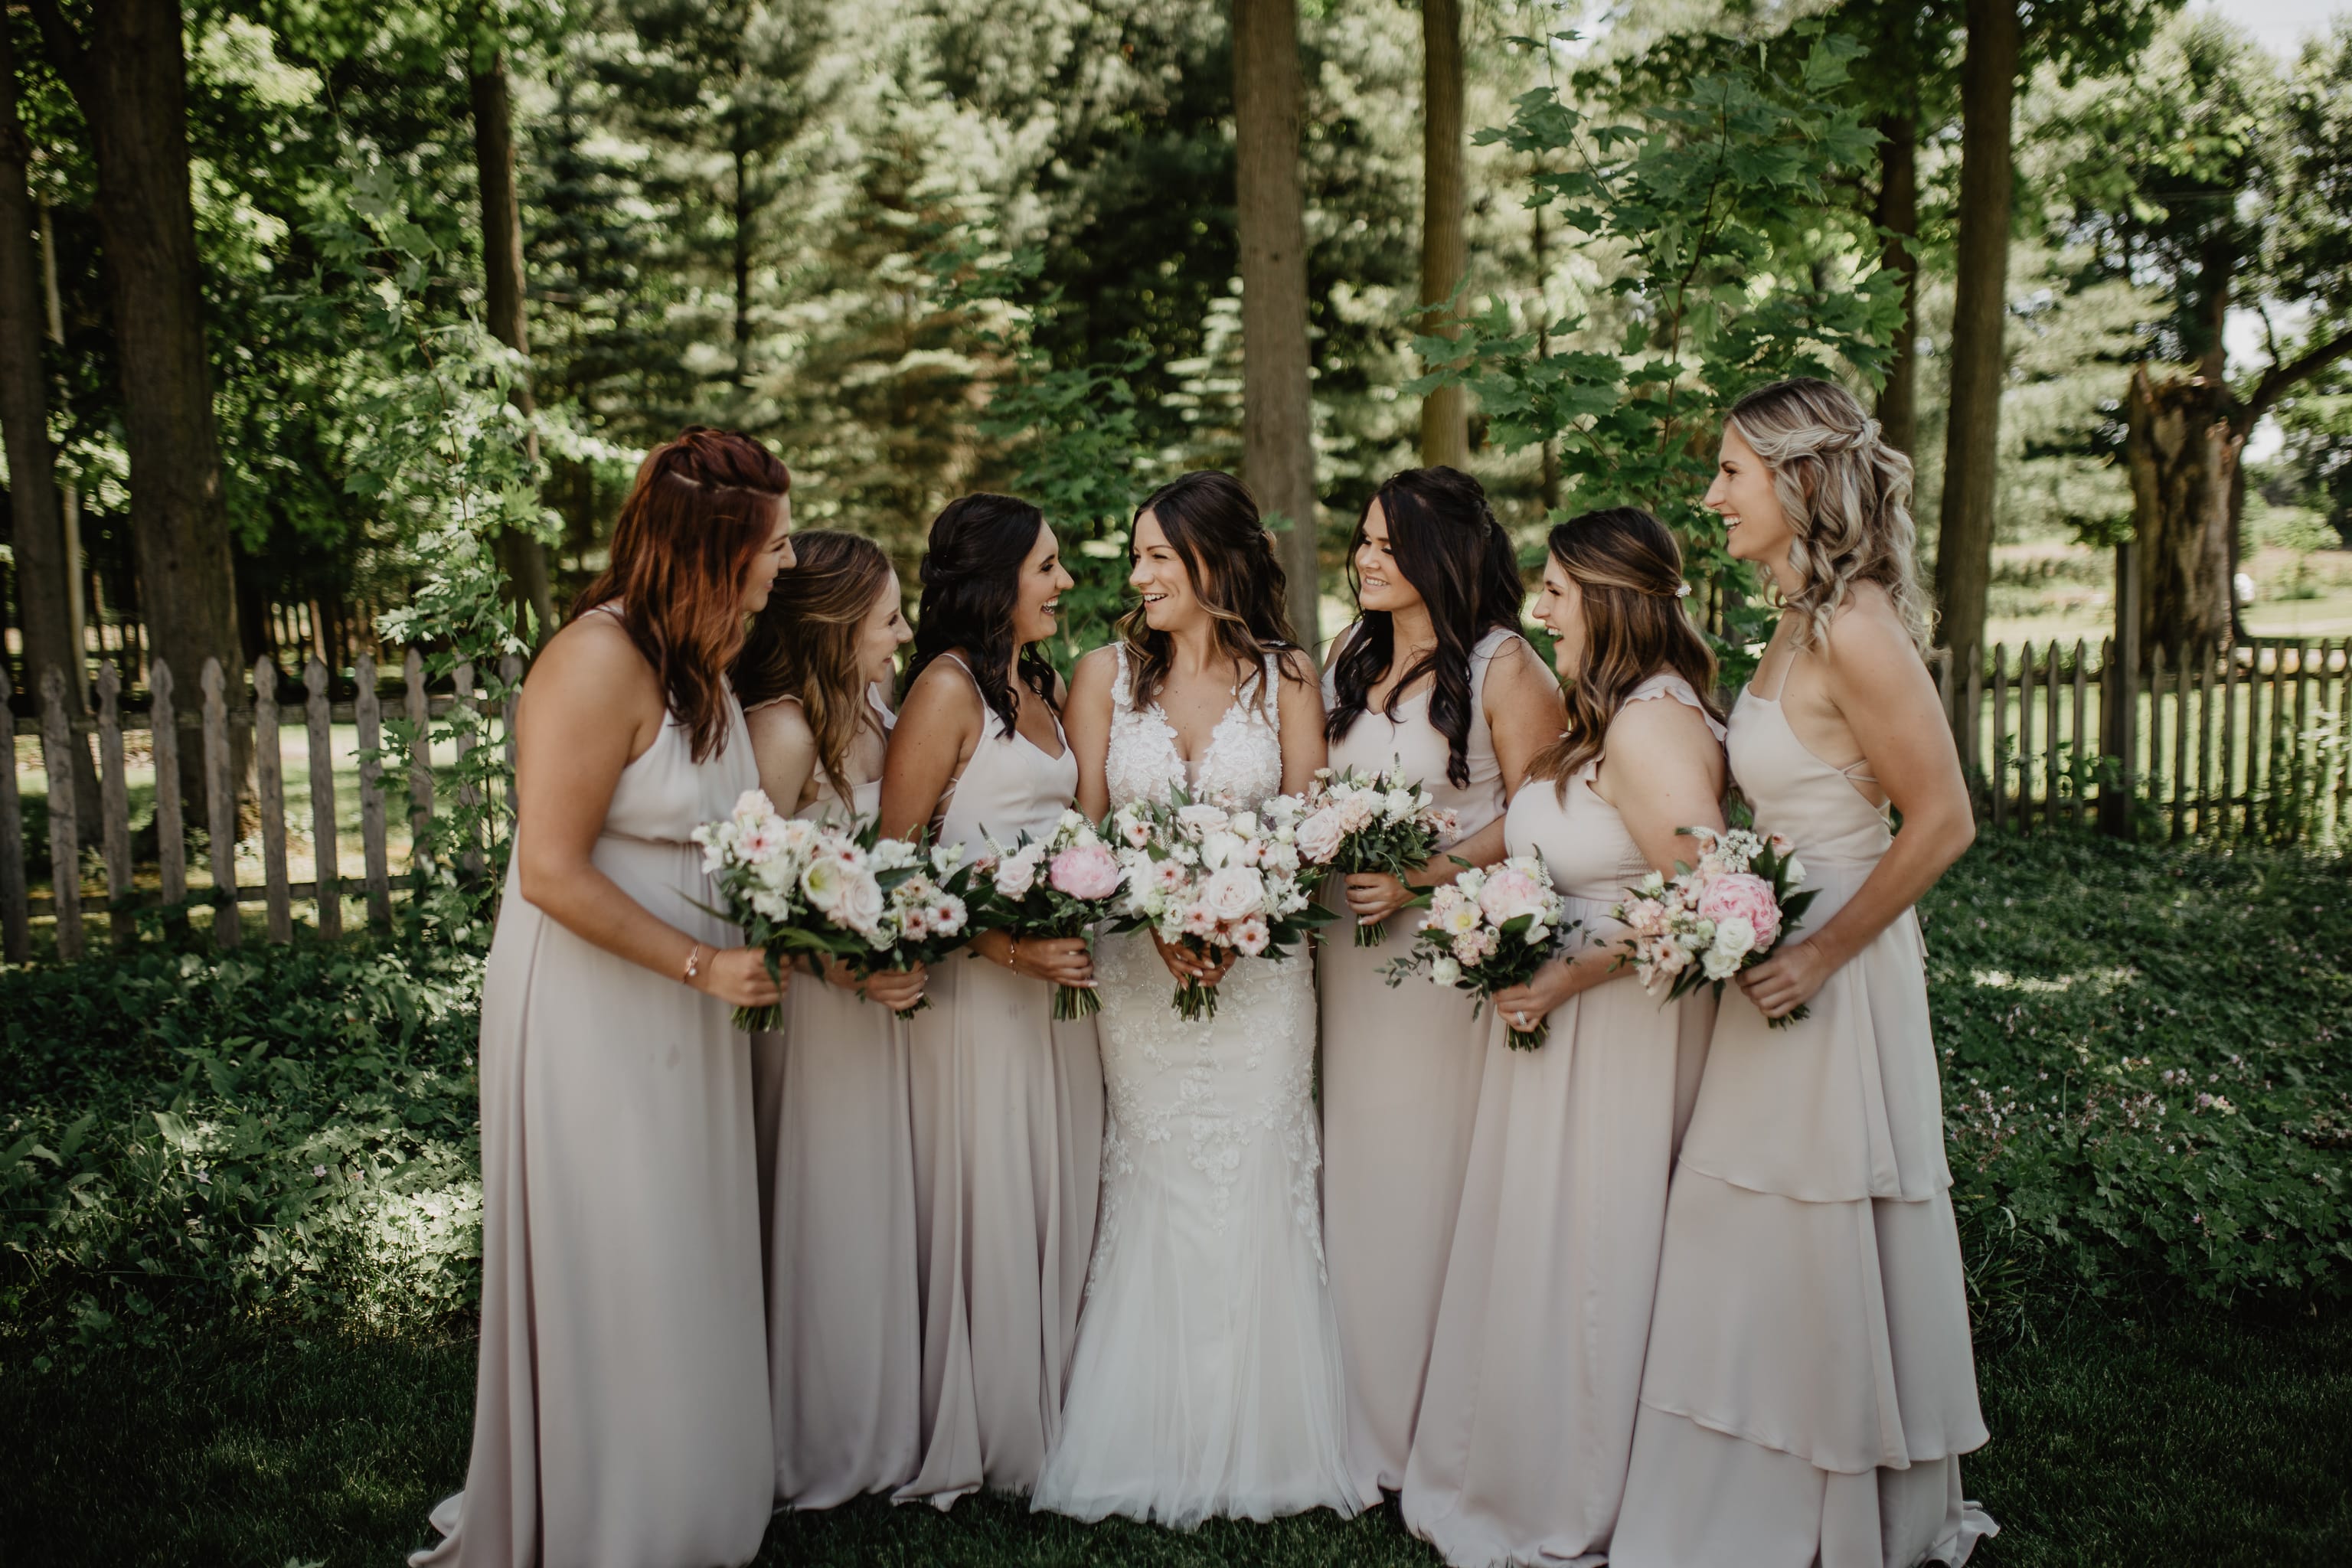 Bride with her bridesmaids in pale pink dresses